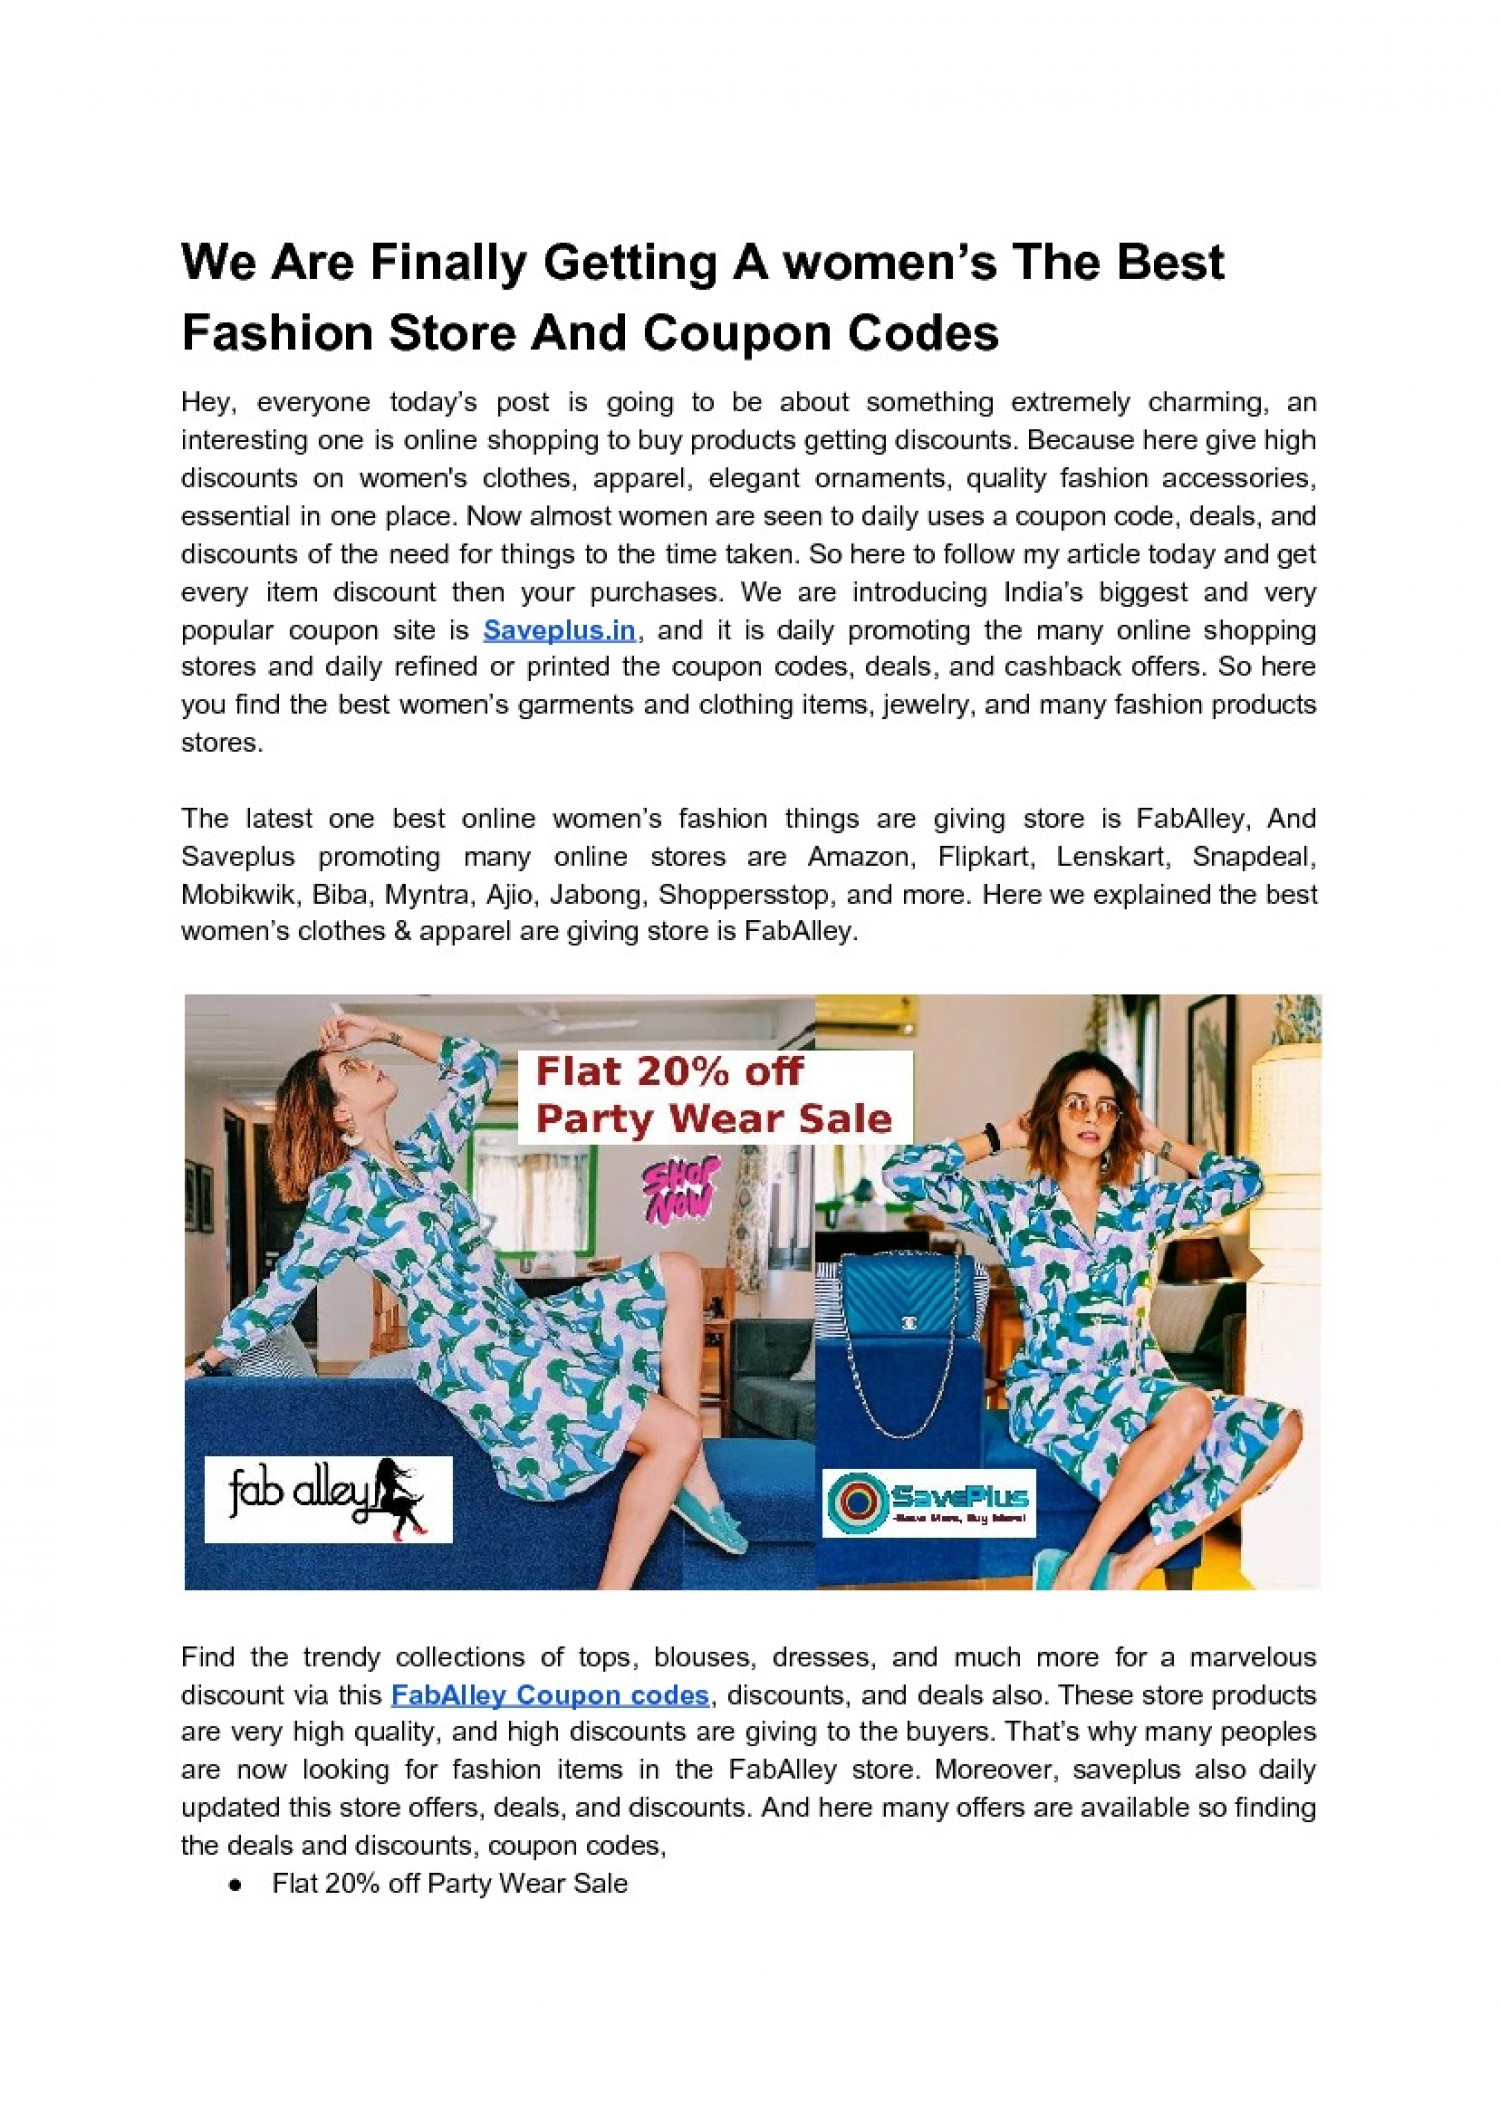 We Are Finally Getting A women’s The Best Fashion Store And Coupon Codes Infographic